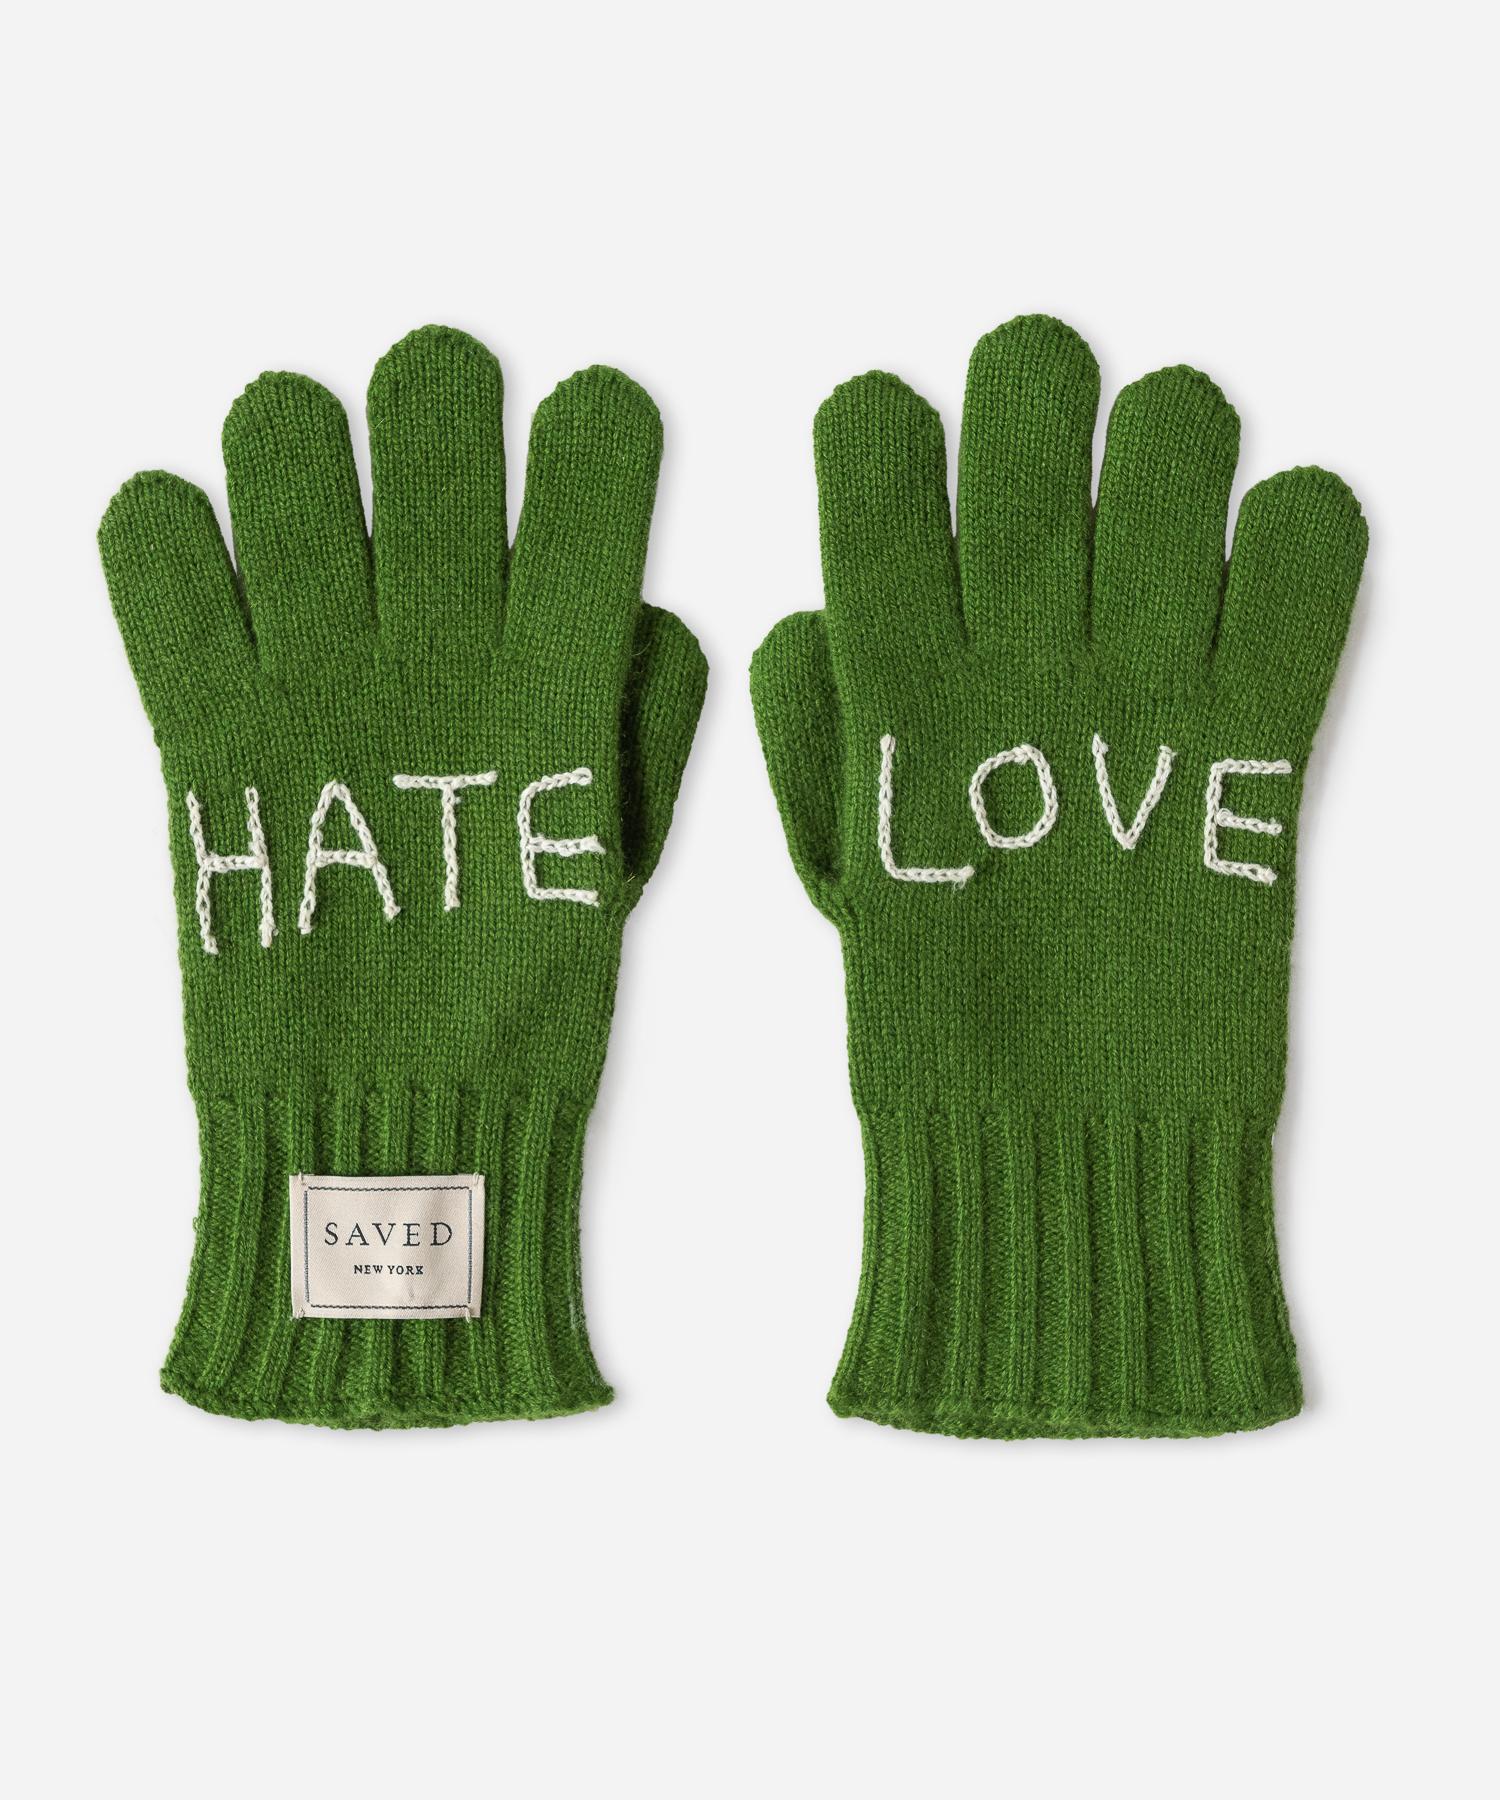 Hate Love green gloves by Saved, New York

Includes contrasting hand embroidery details. One size.